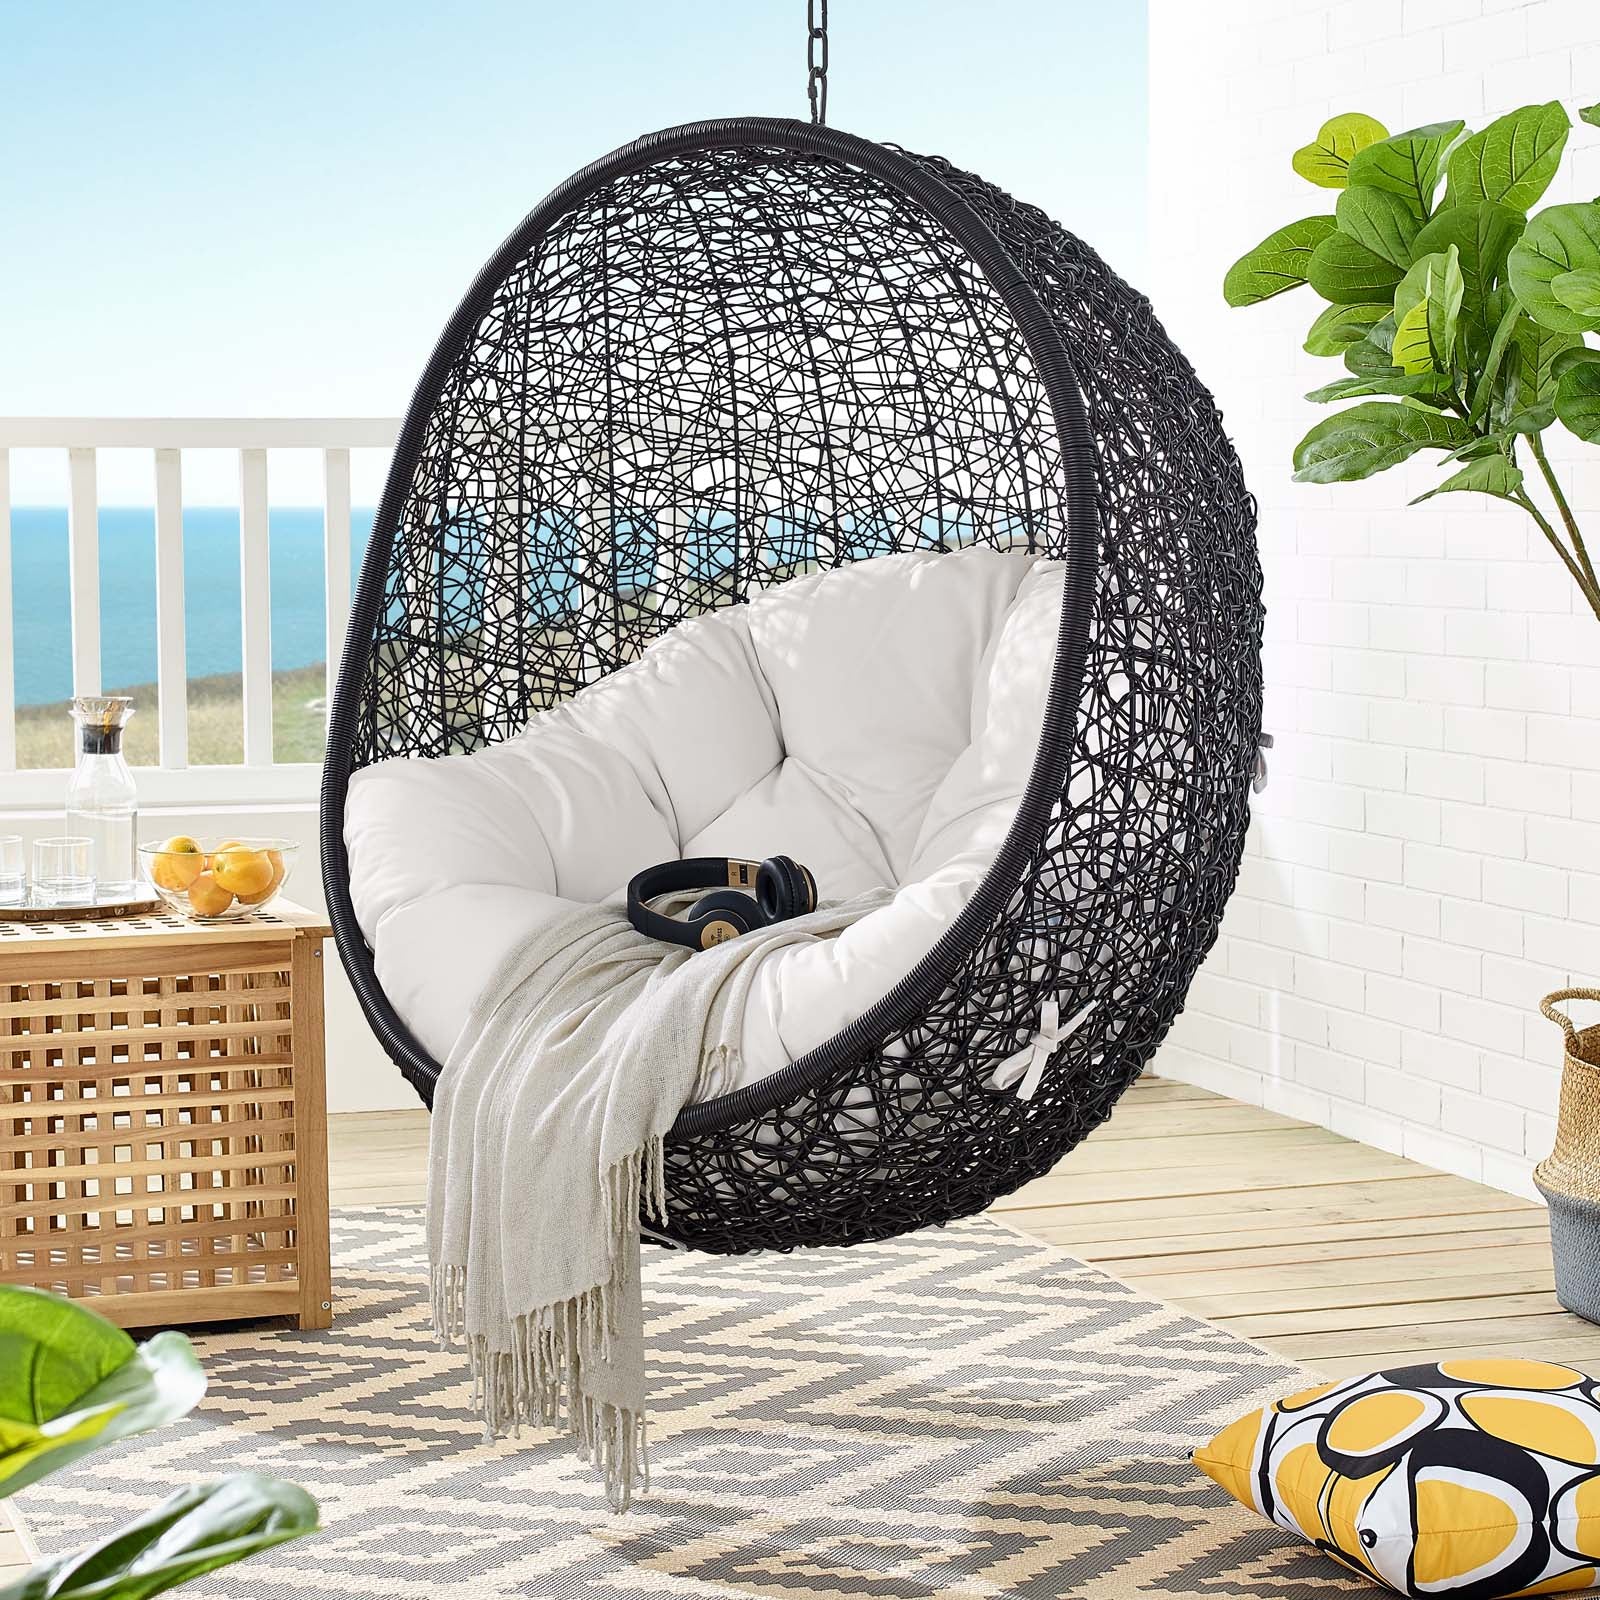 Encase Sunbrella® Fabric Swing Outdoor Patio Lounge Chair Without Stand